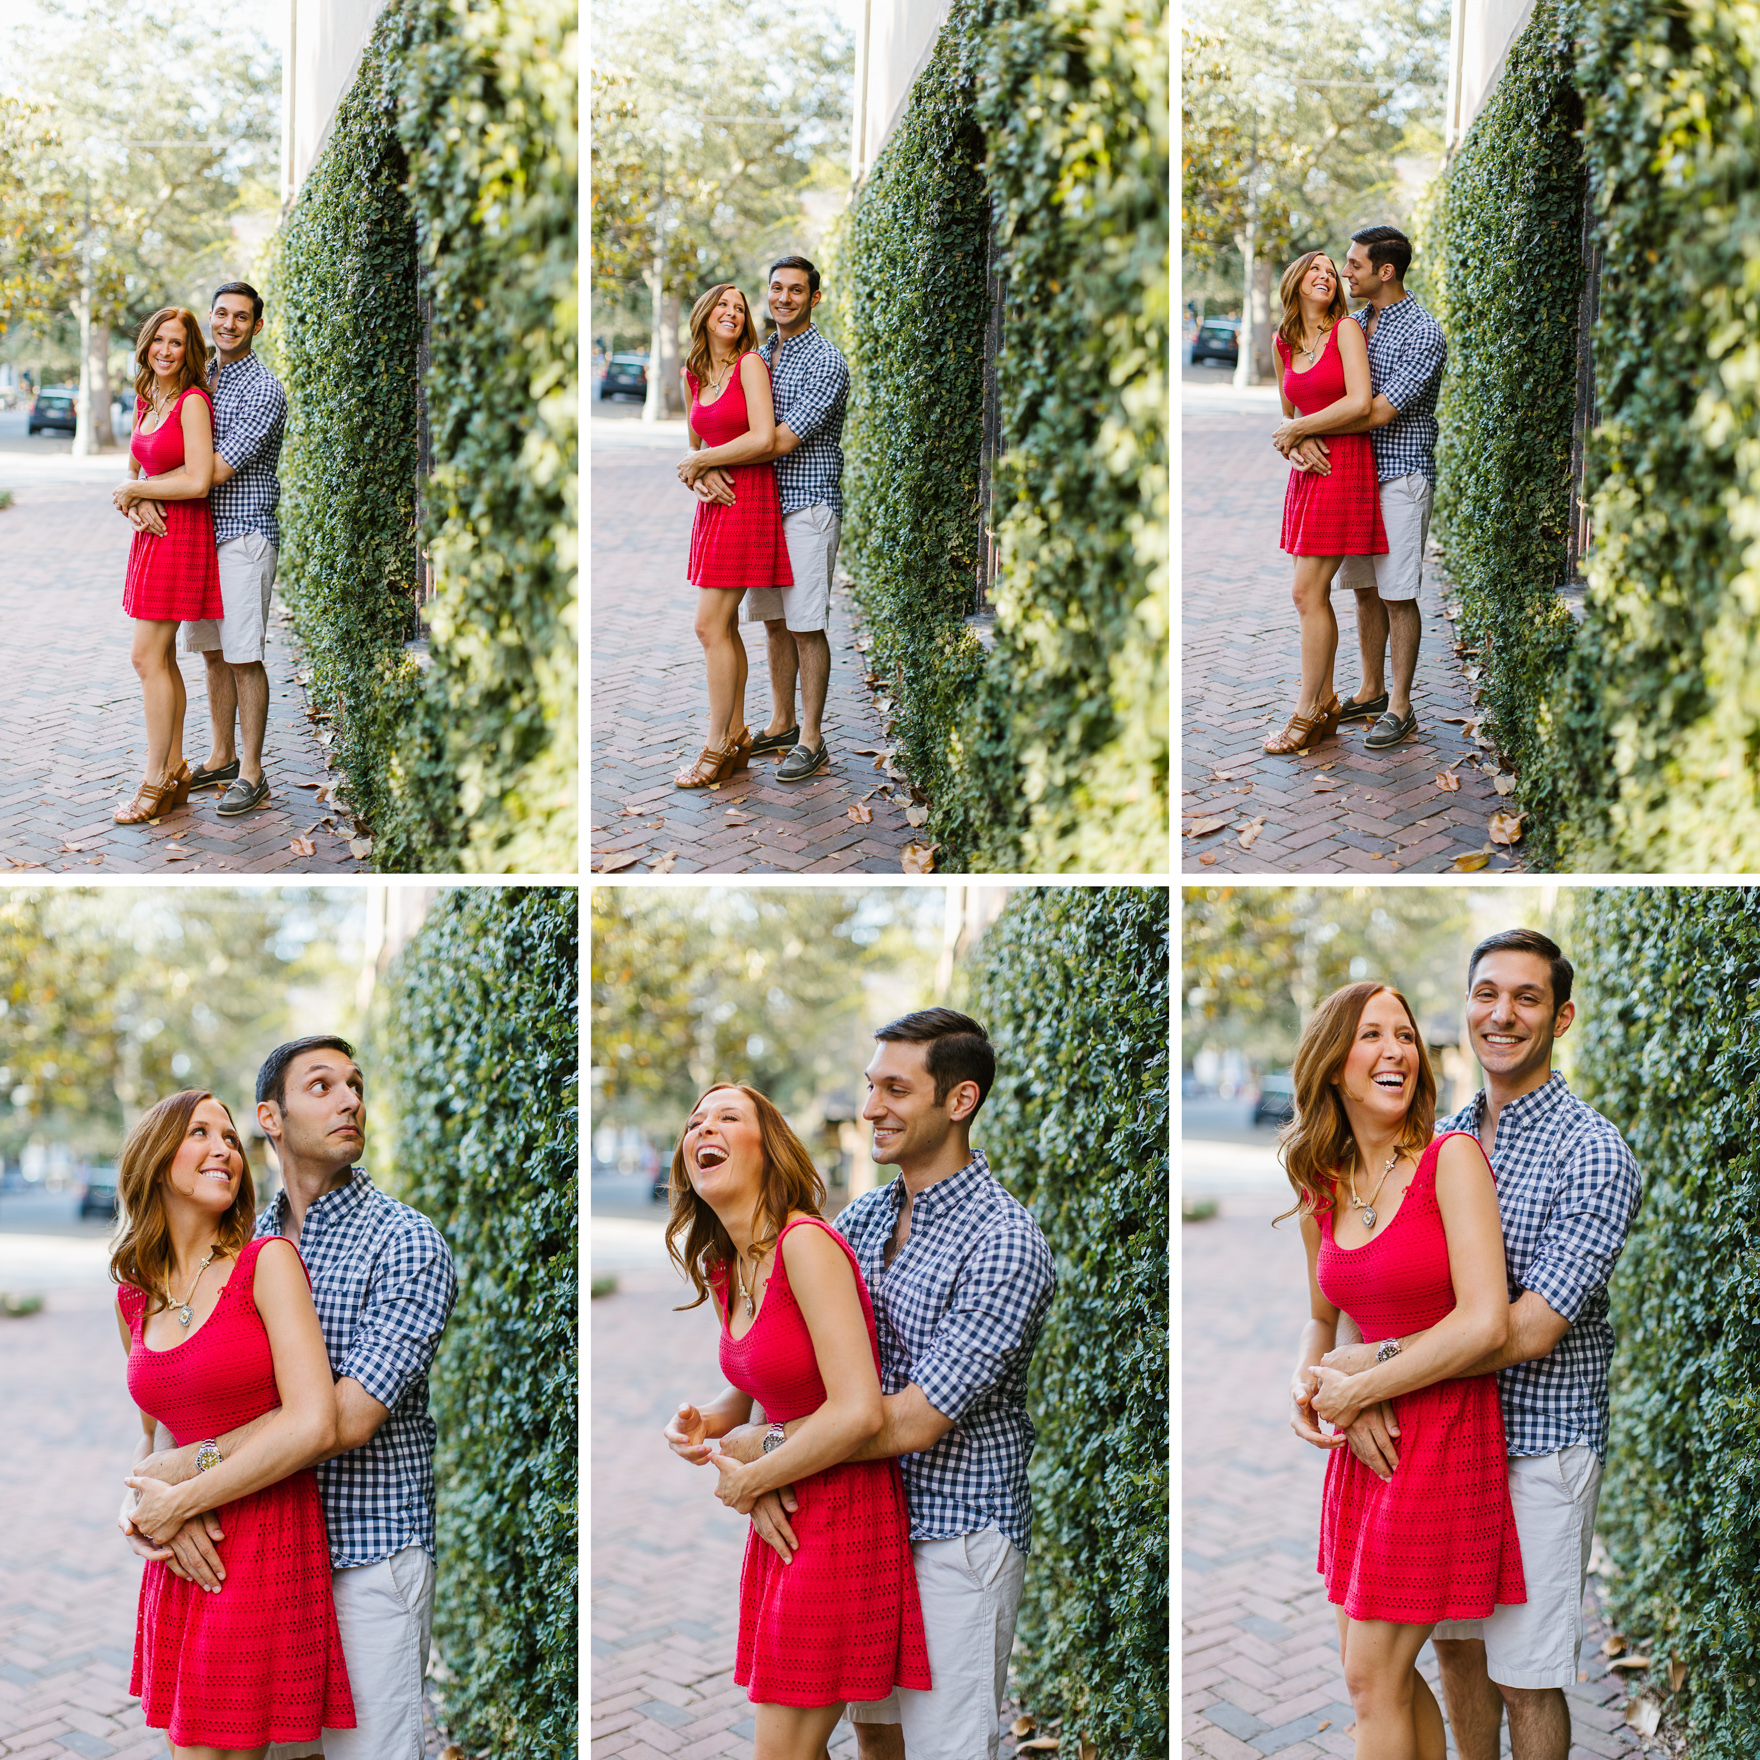 Couple standing on brick street with ivy covered wall